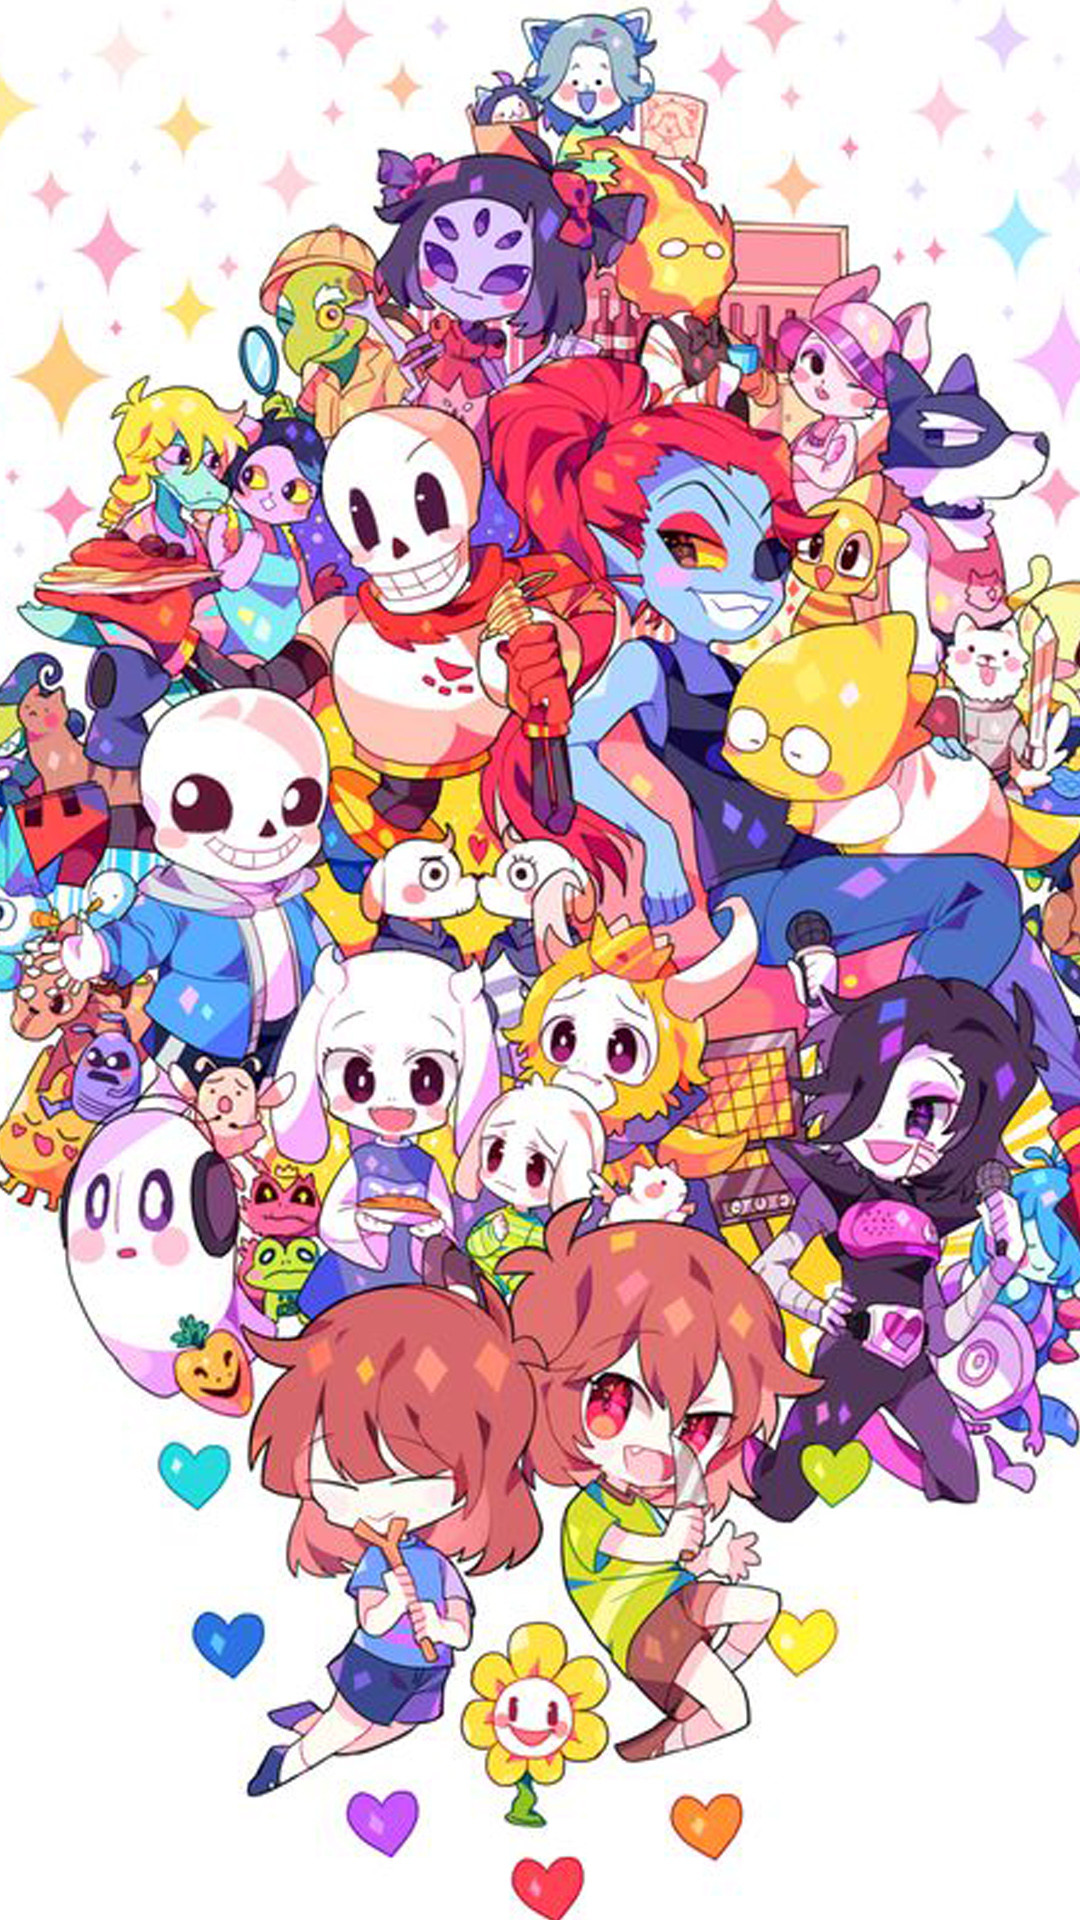 1080x1920 Undertale Determination IPhone Wallpaper by sugoisenpai42 on